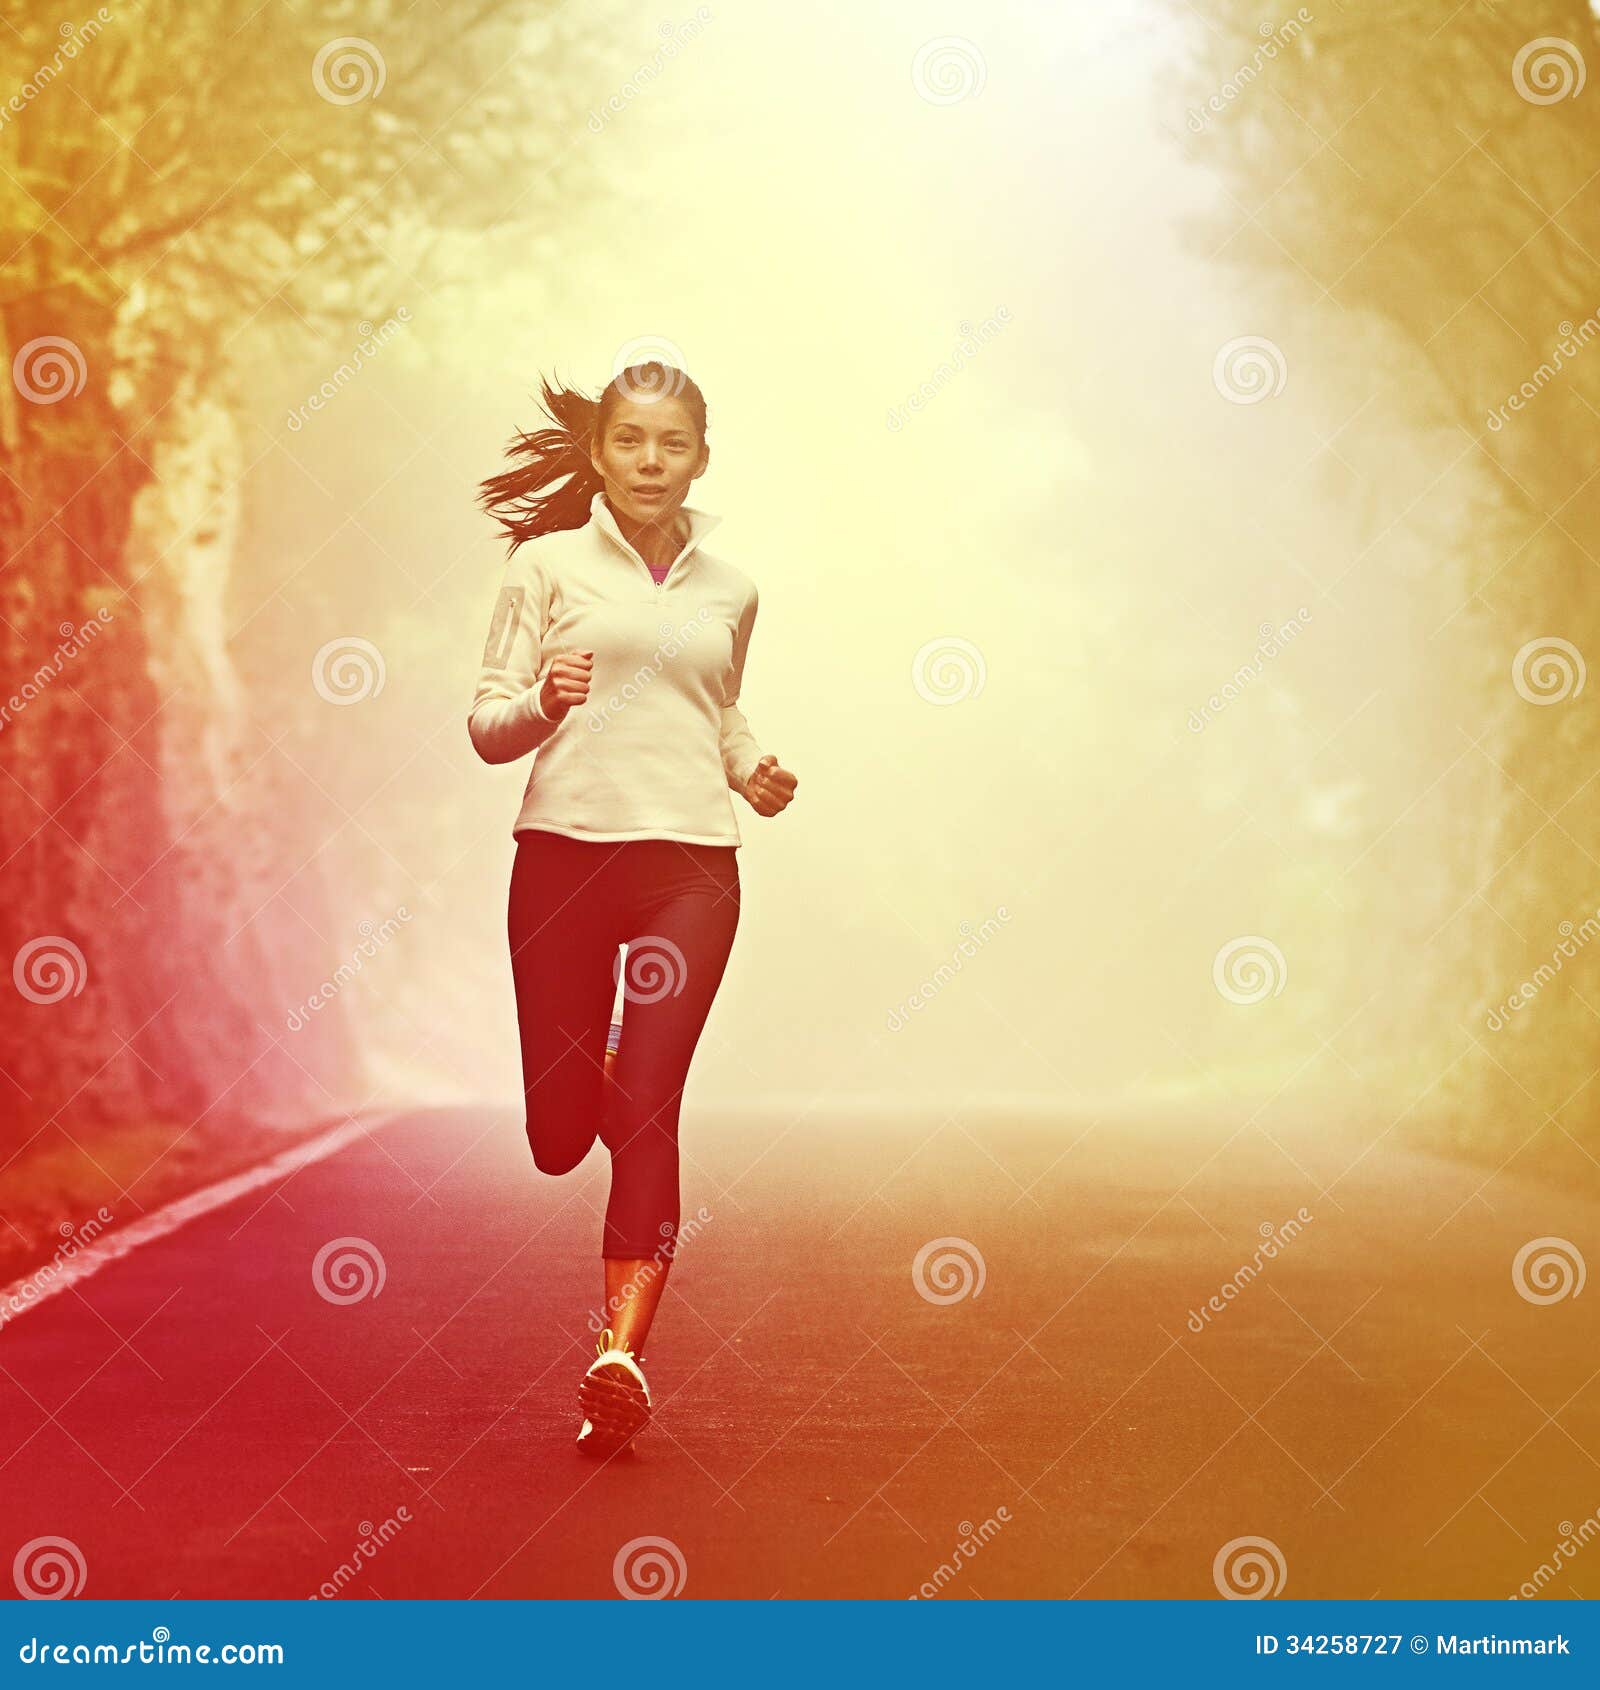 Woman runner in jogging outfit running on a street. Woman